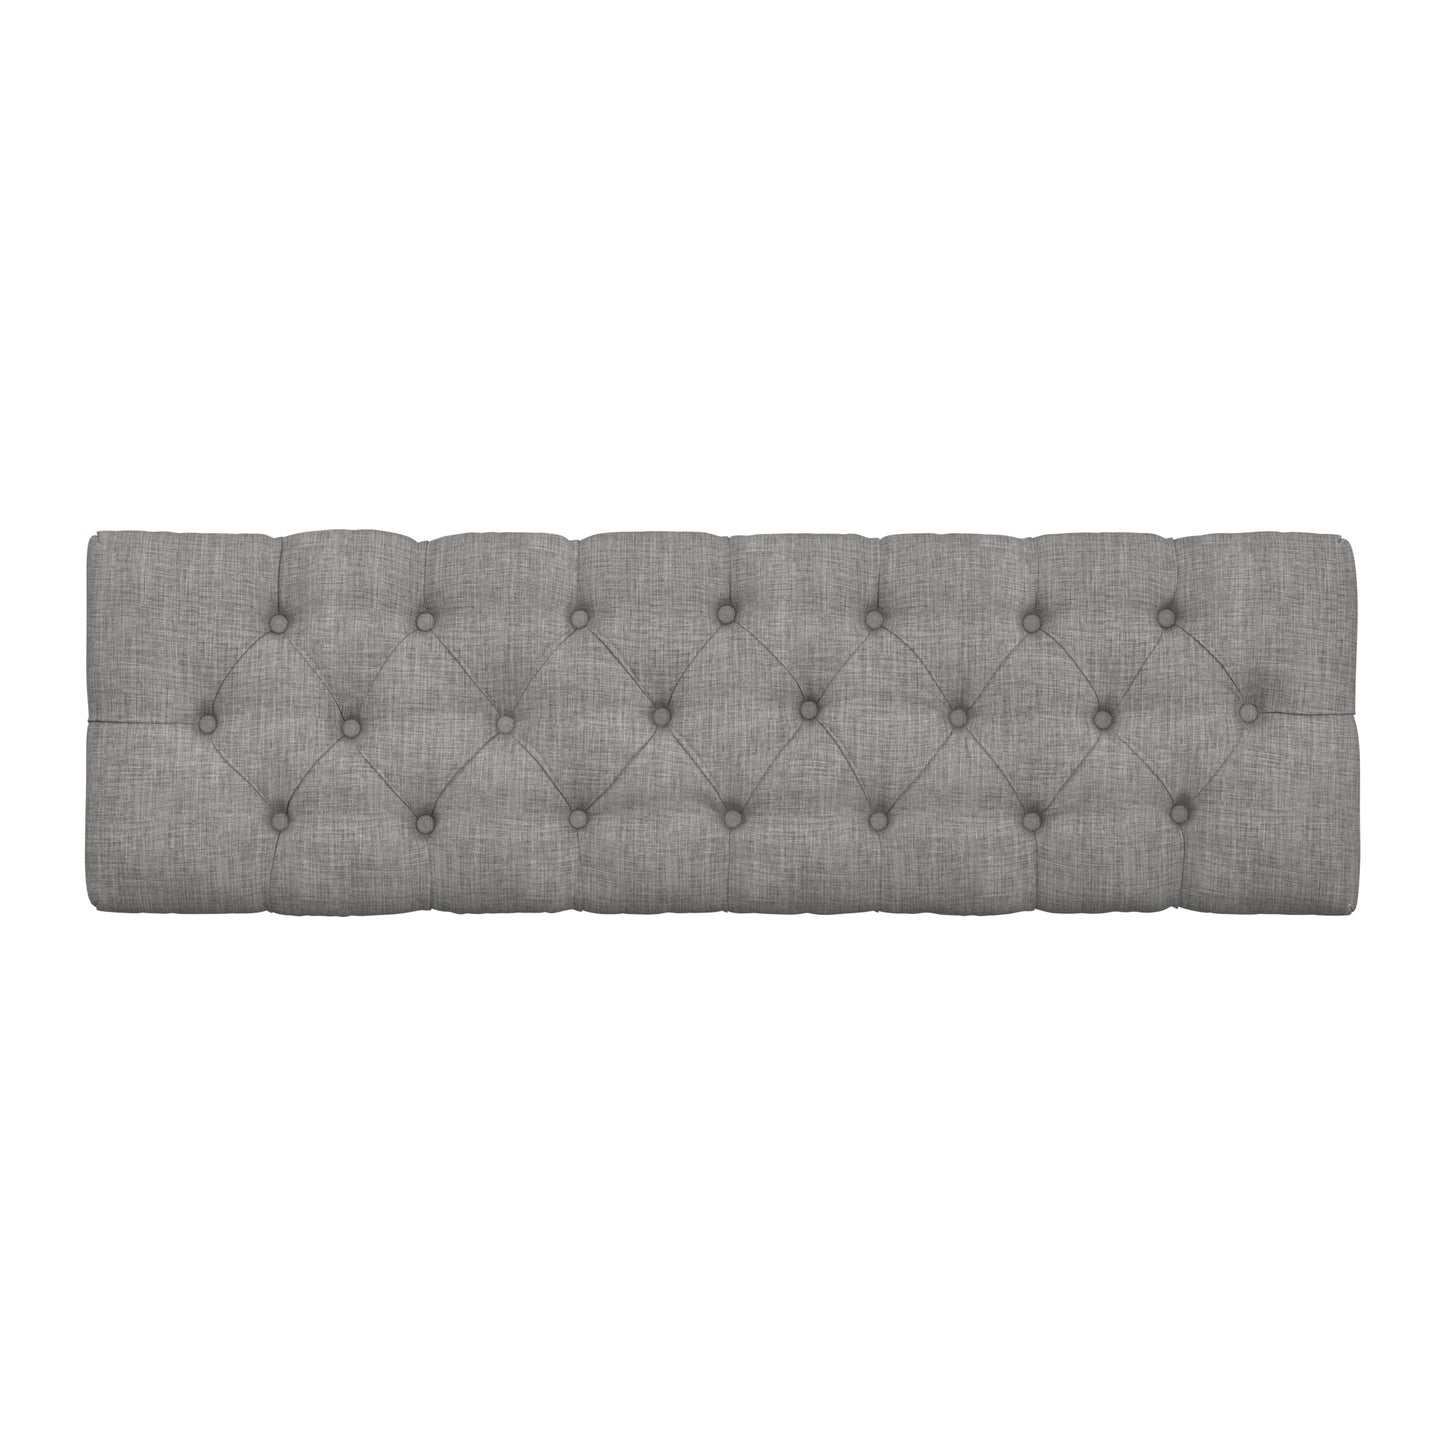 Premium Tufted Reclaimed Look 52-inch Upholstered Bench - Grey Linen